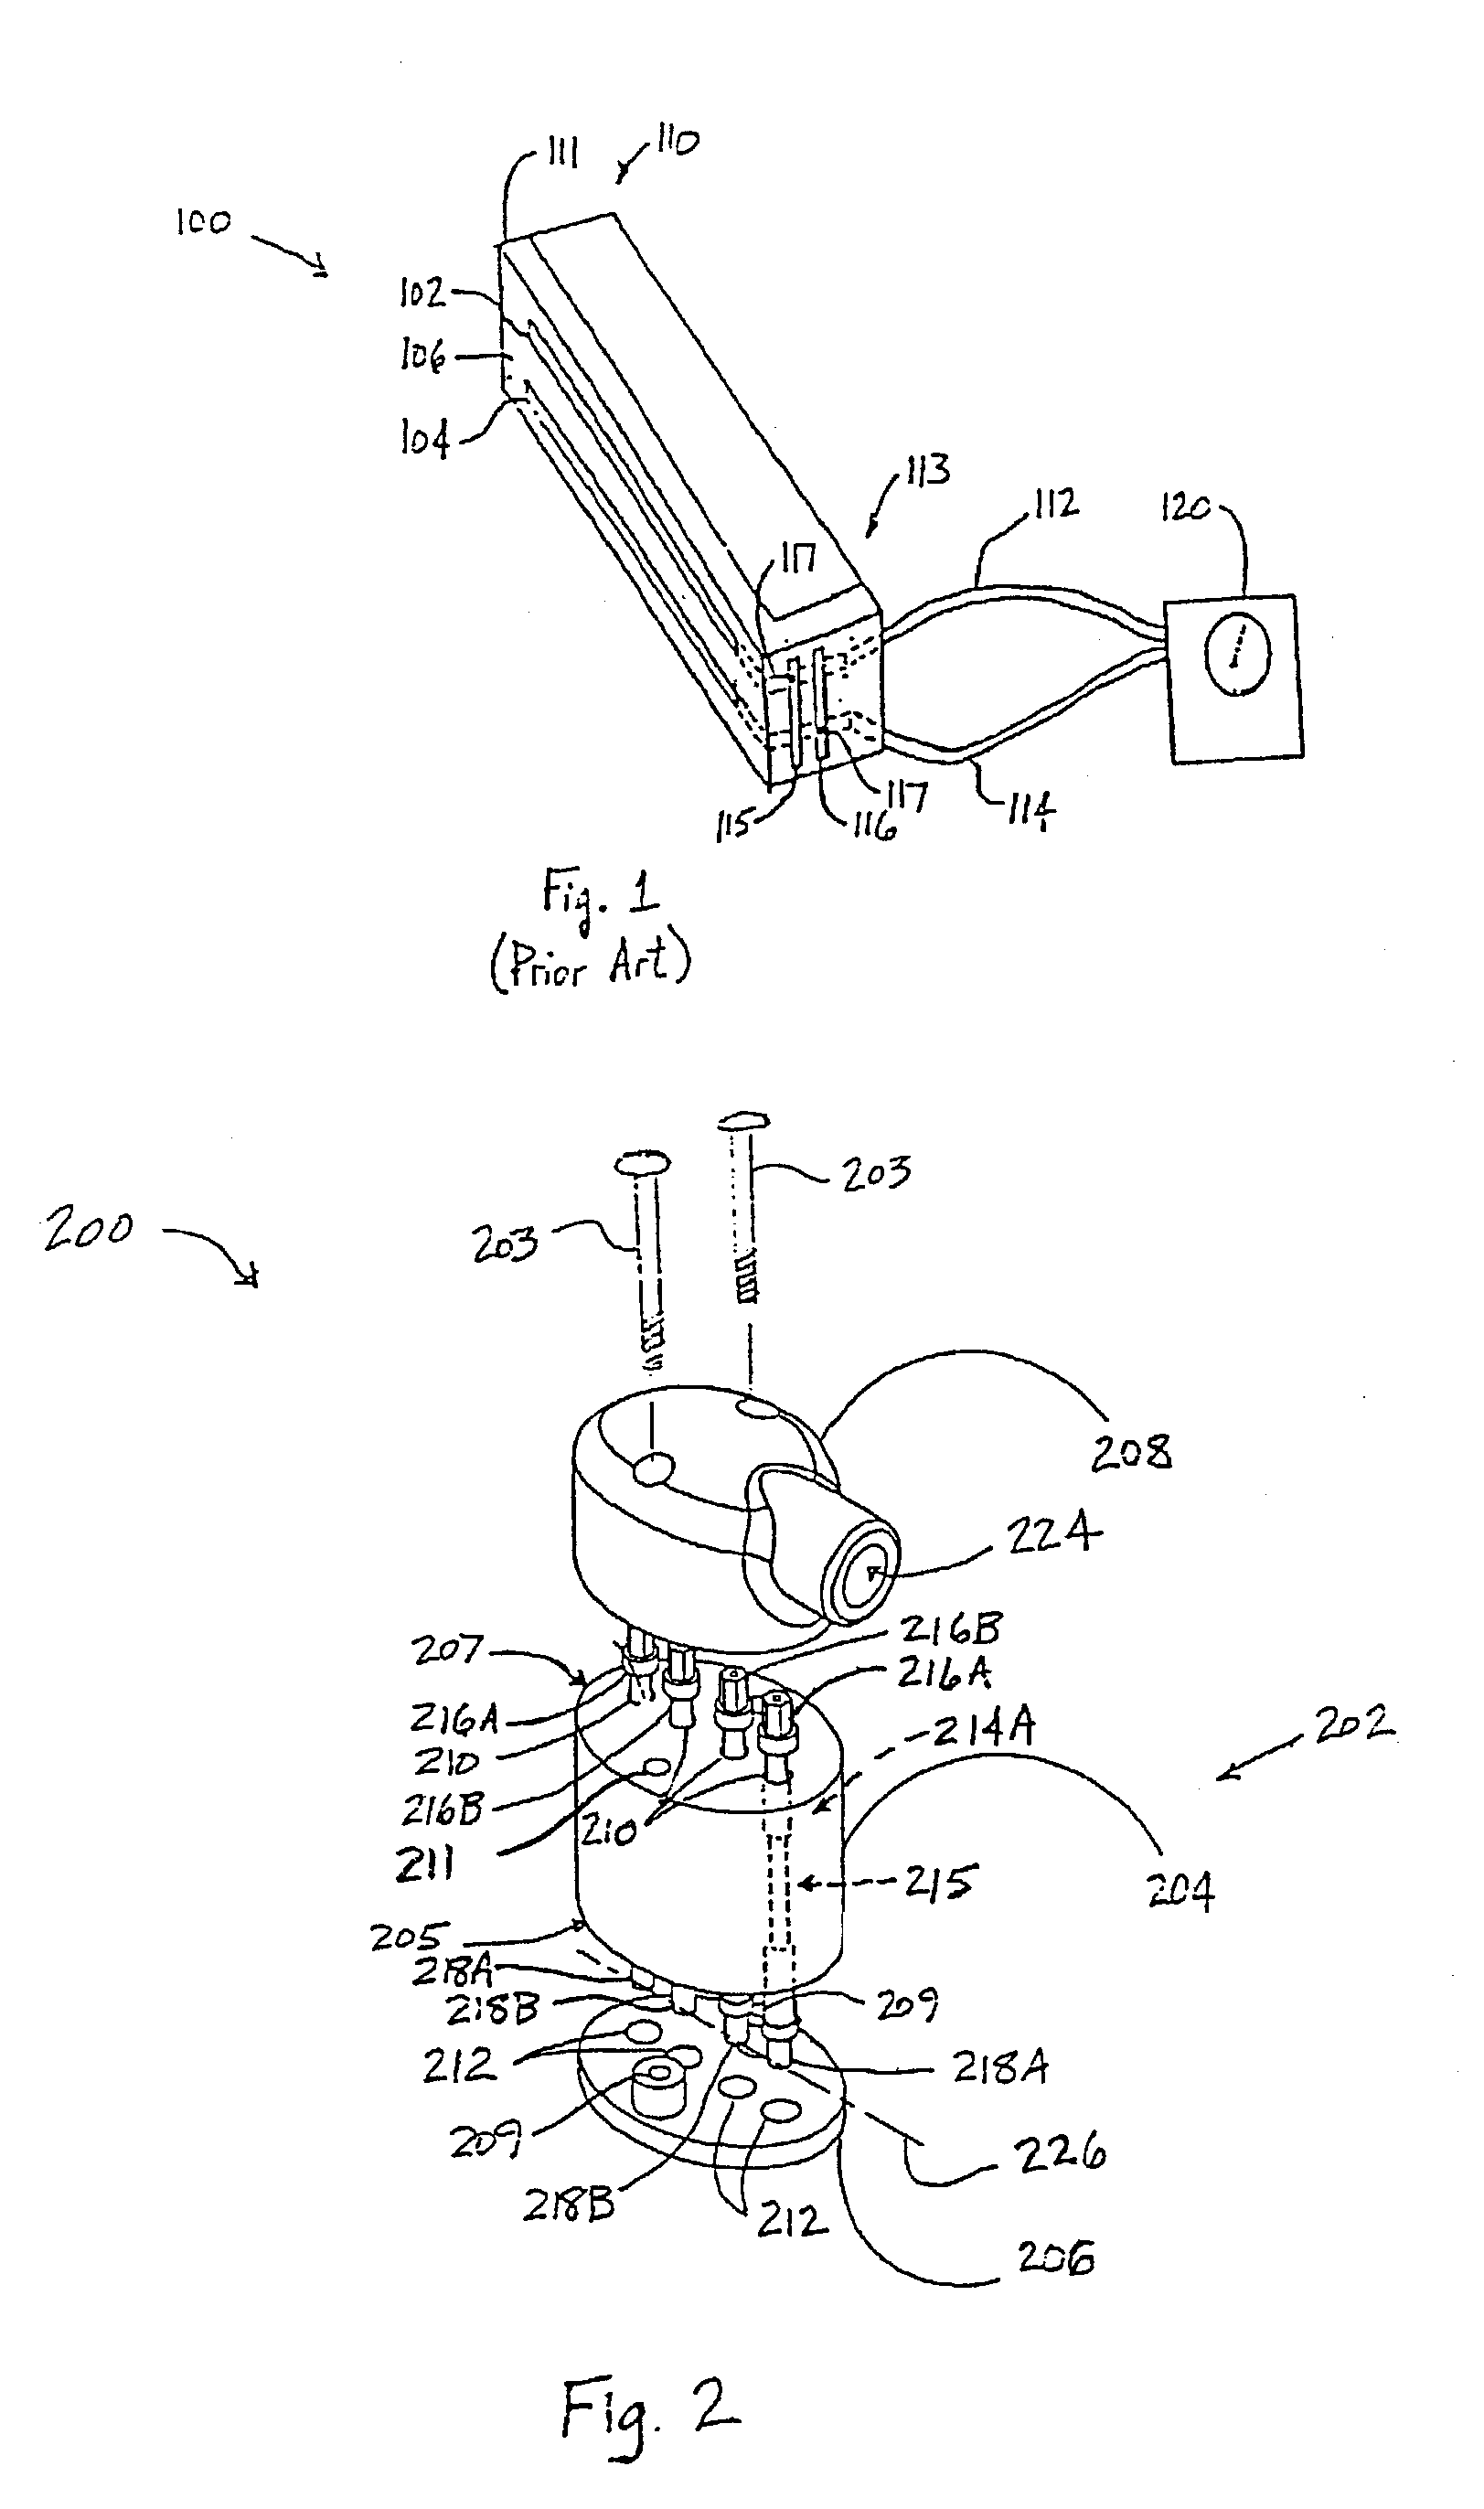 Apparatus and methods for measuring resistance of conductive layers